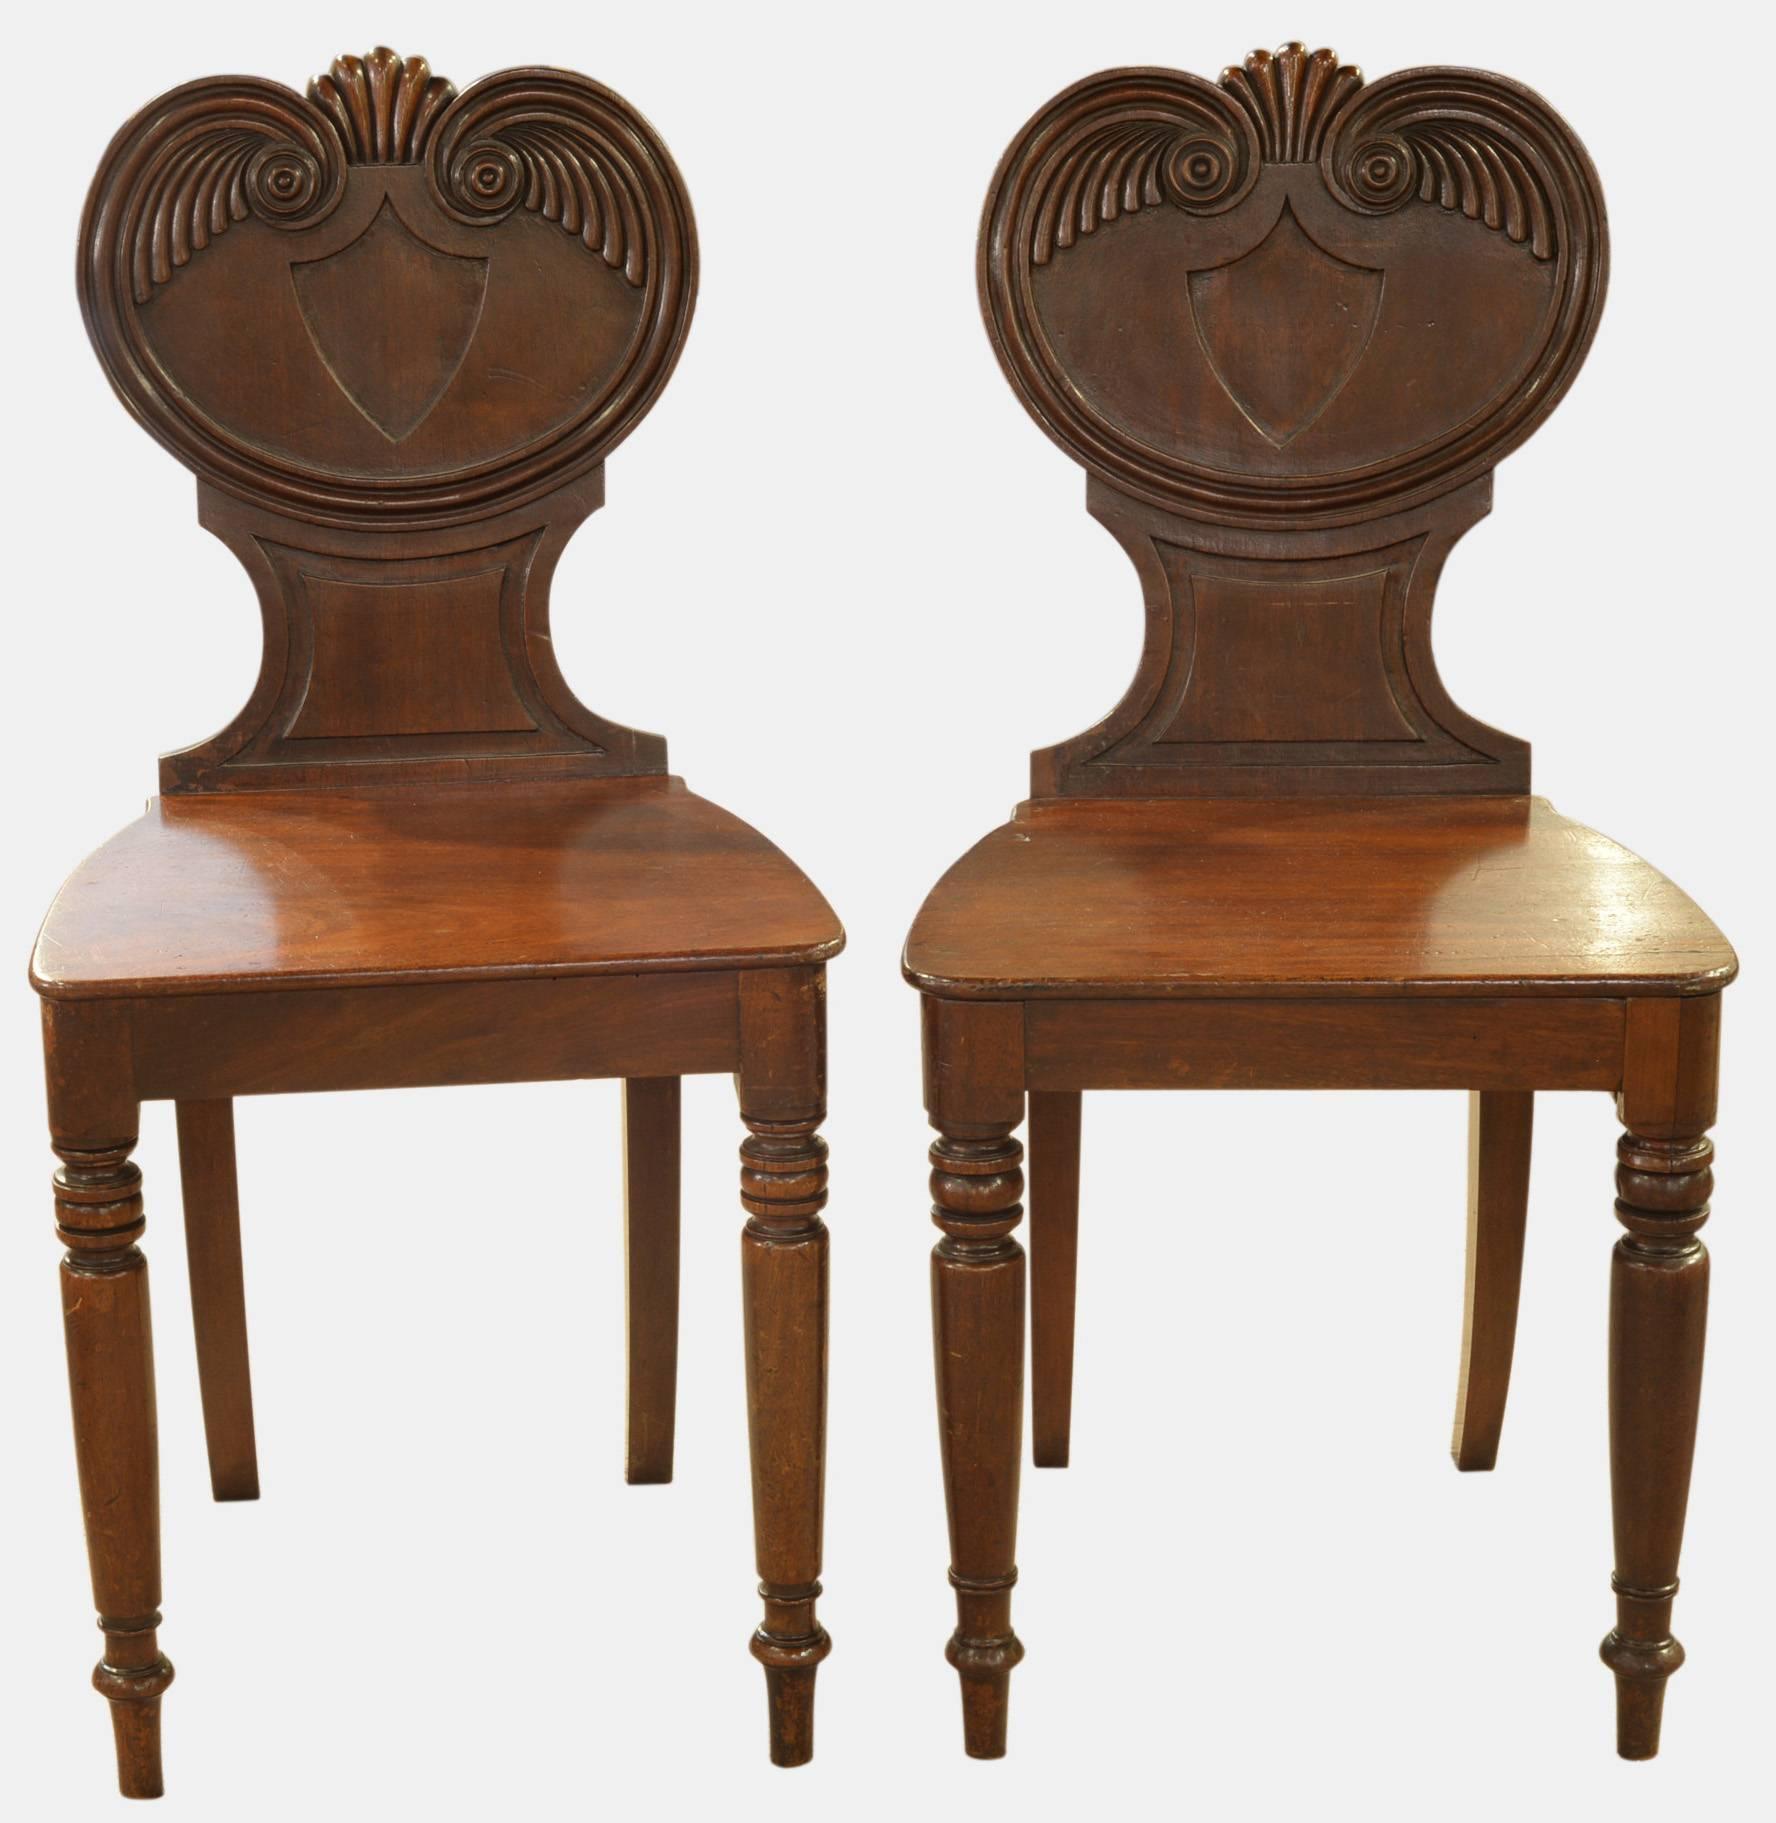 A pair of mahogany hall chairs on front turned legs, circa 1830.